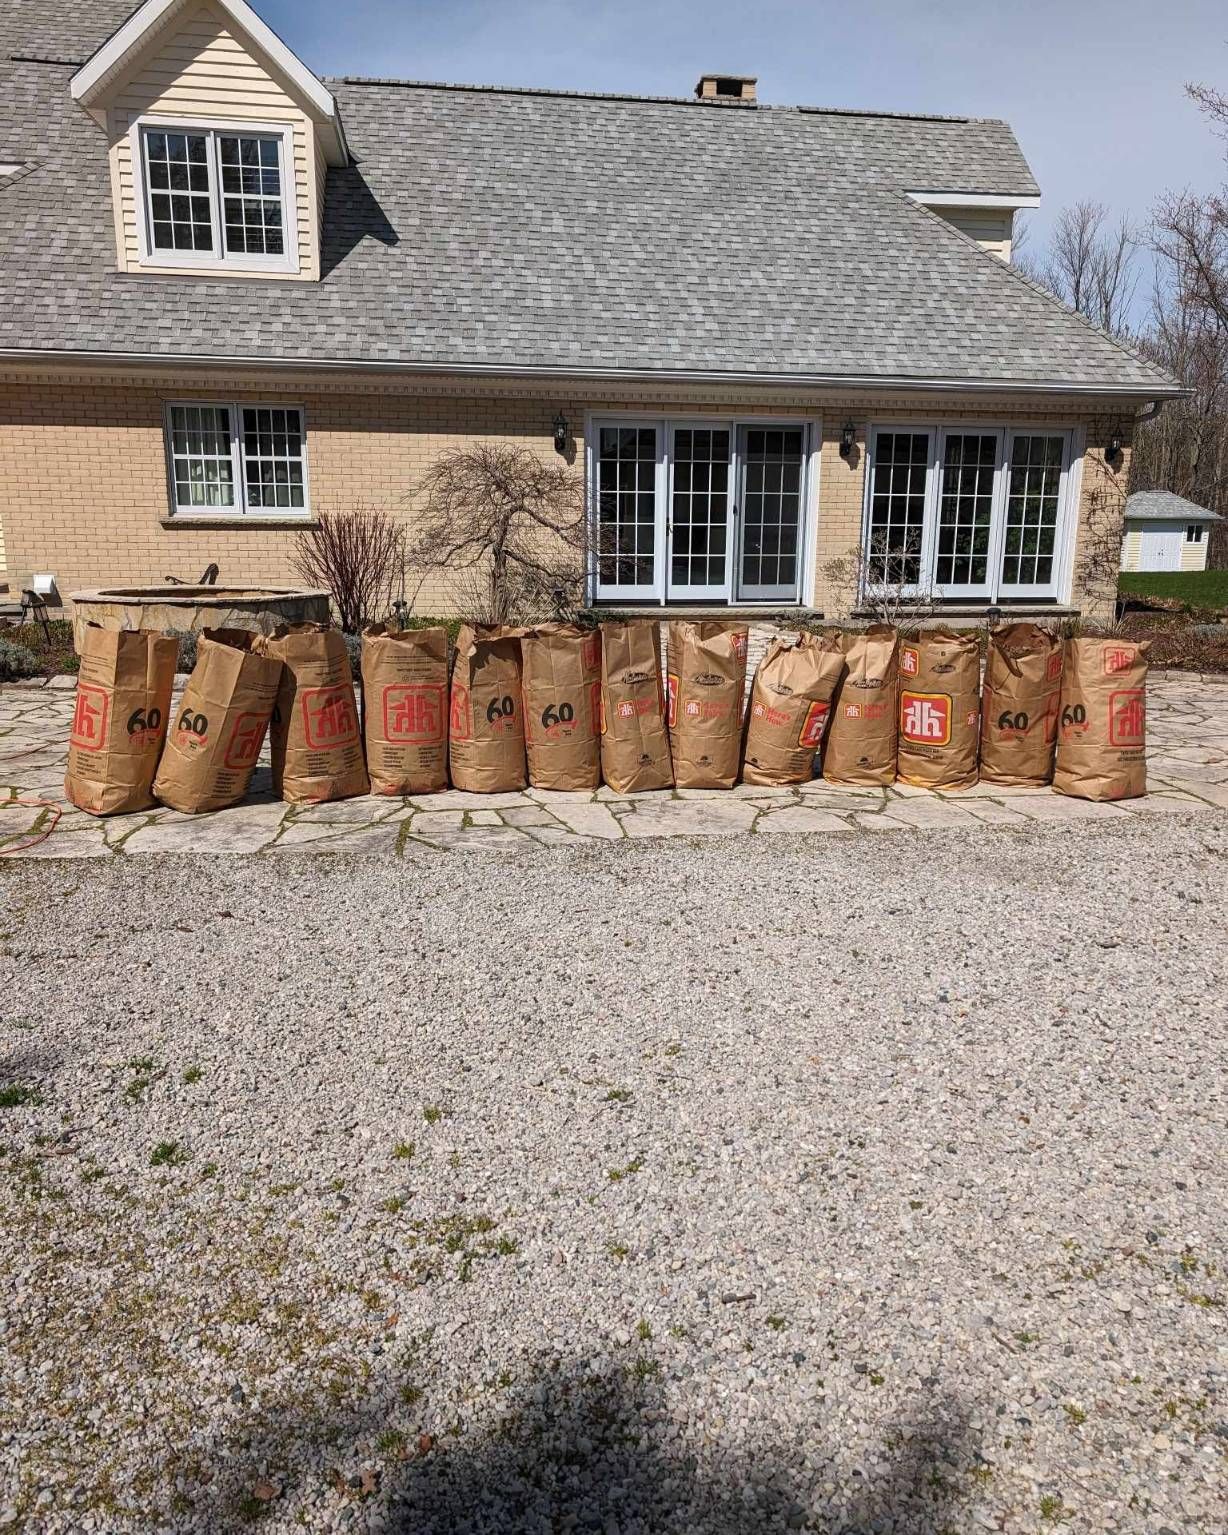 Instagram really needs to let you upload more then 10pics  at a time!  My arms feel like Jello today haha #yardwork #cleanup #rakingleaves #entrepreneur #bosslady #supportlocal #supportsmallbusiness #portofgoderich #surroundingareas #lakehome #lakehuron